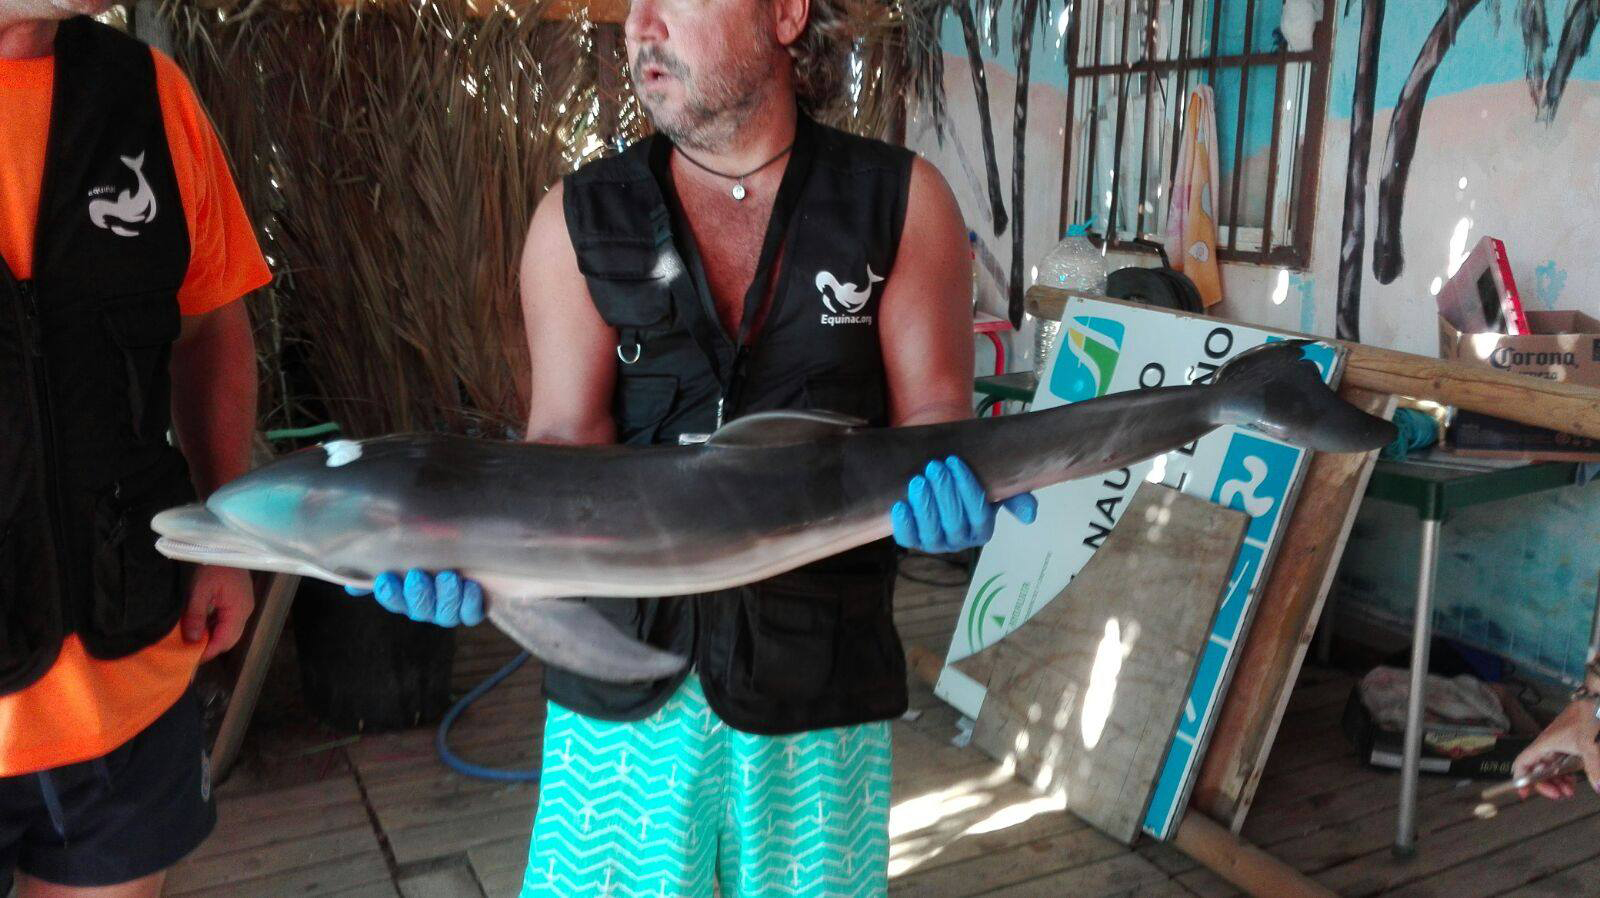 A man holds a dolphin that the group Equinac reported had died in Spain in early August after beachgoers touched and posed for selfies with it.